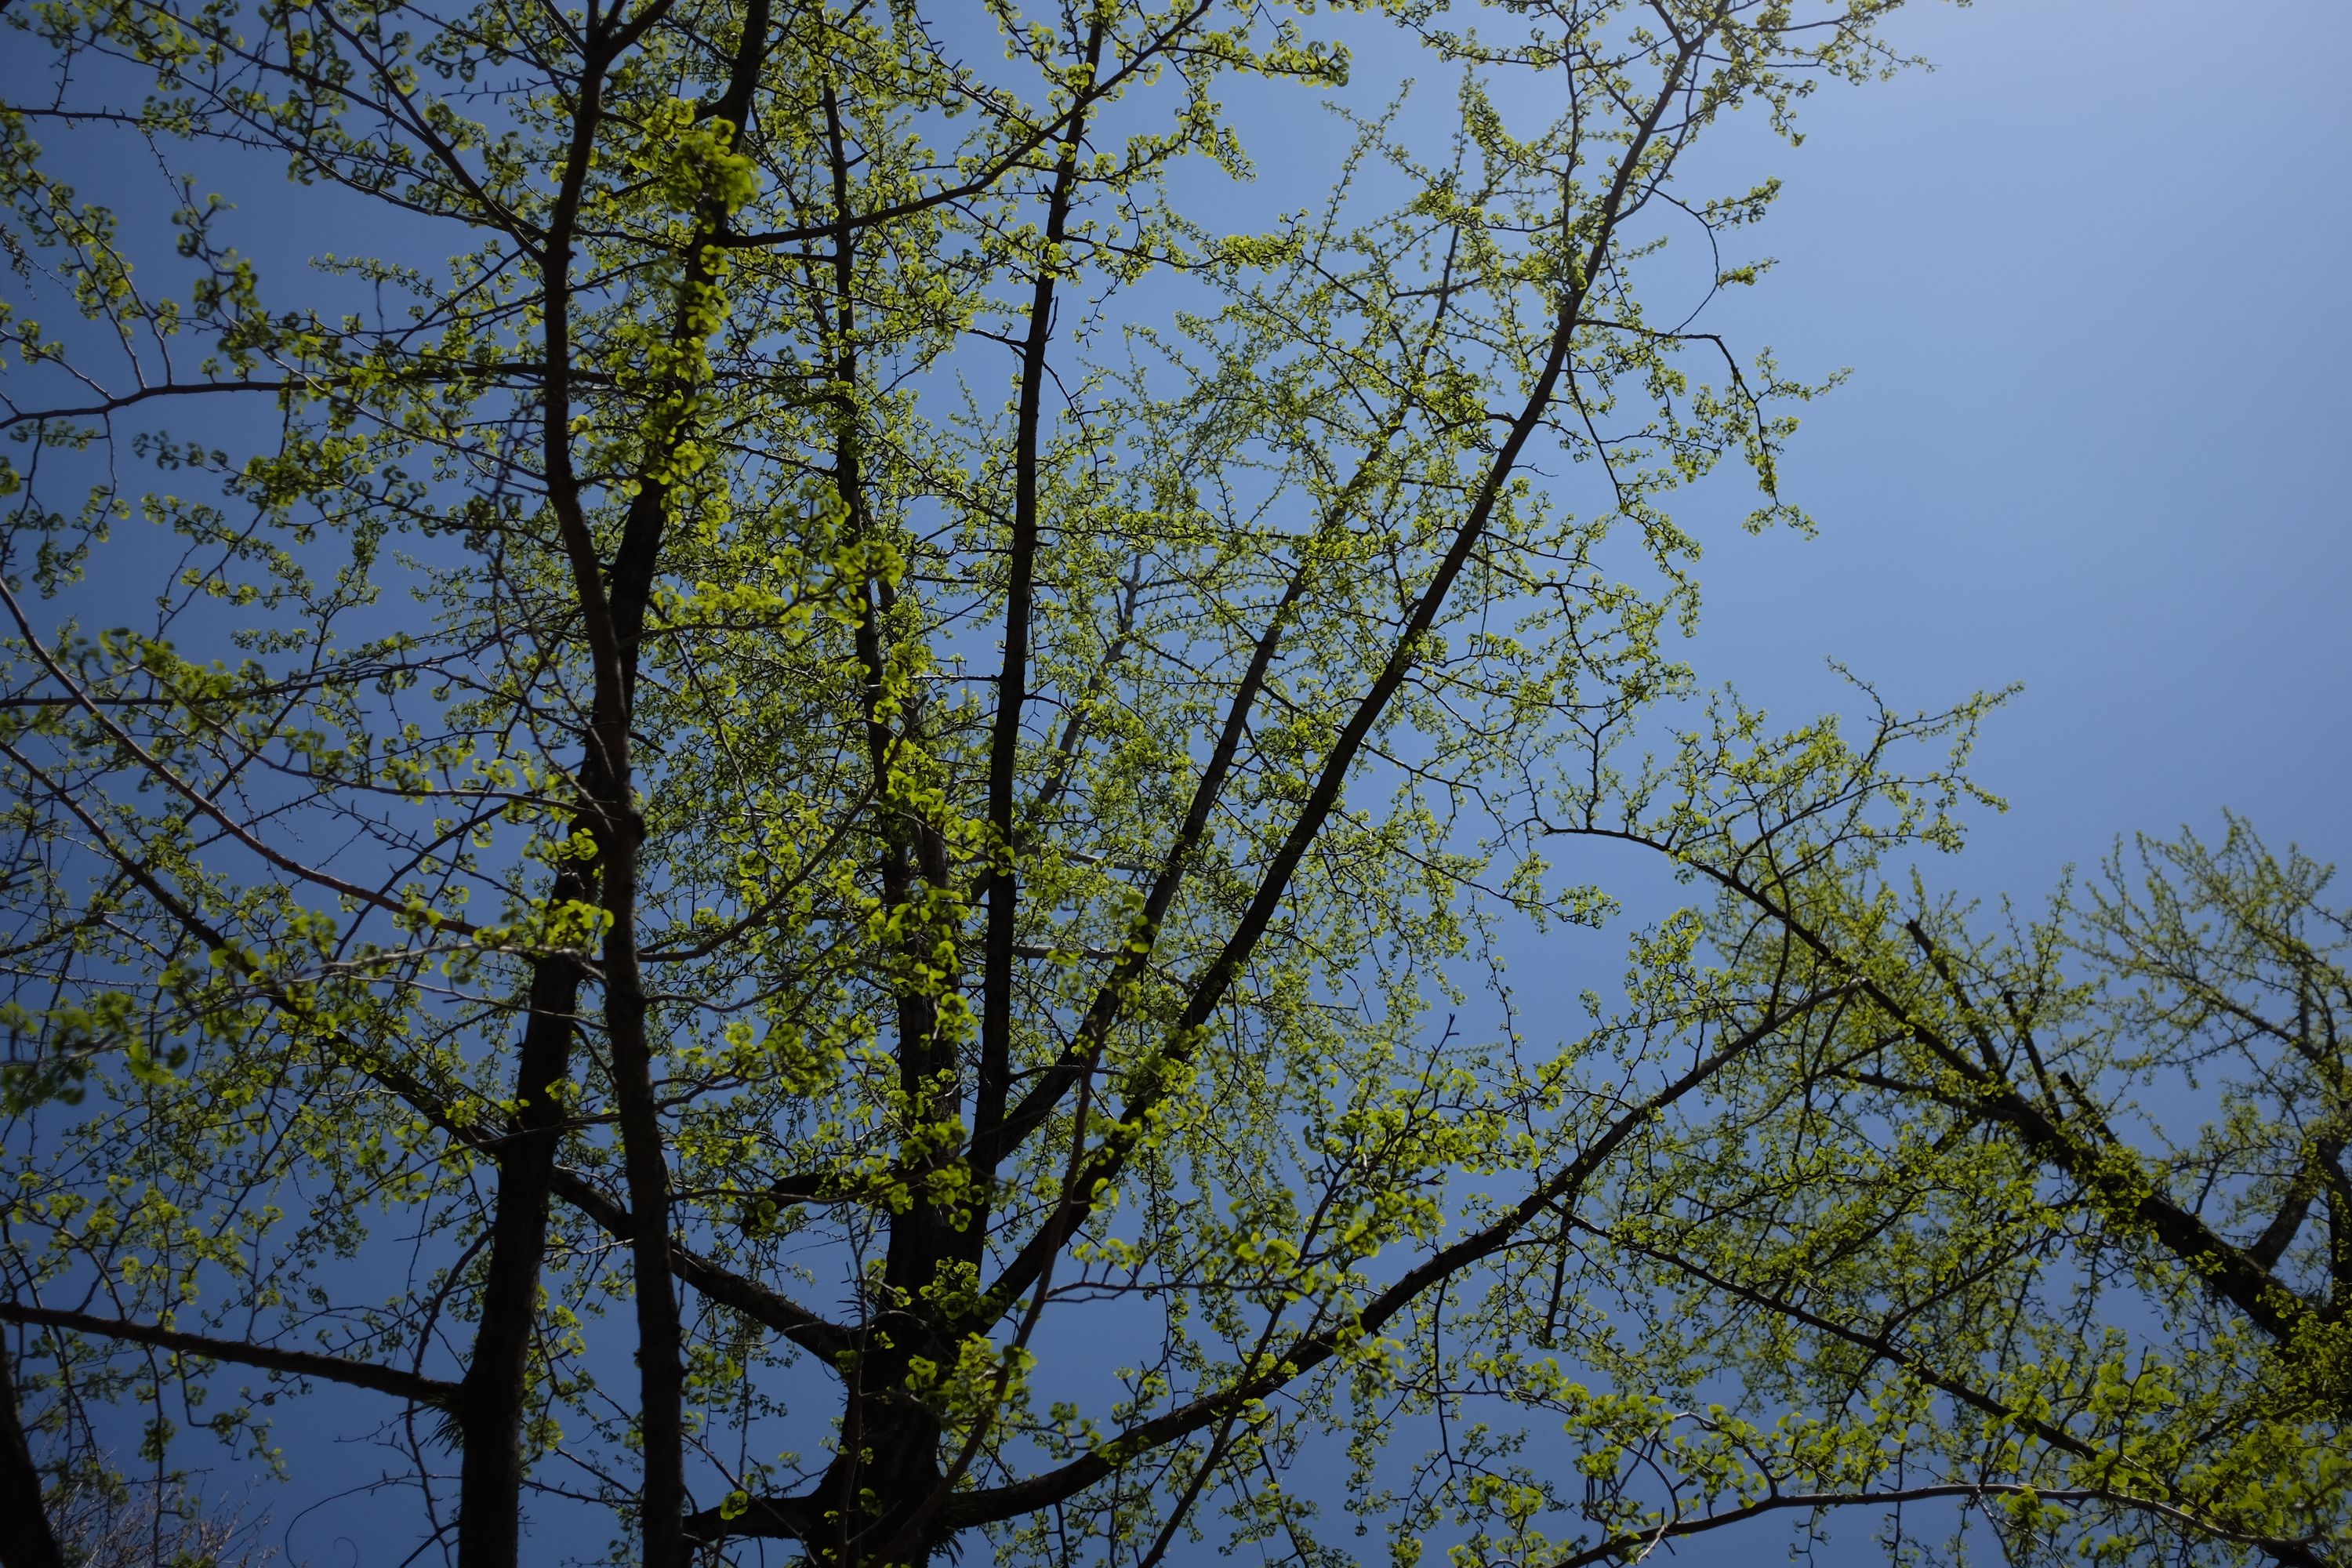 Ginkgo trees with fresh leaves against a pale blue sky.